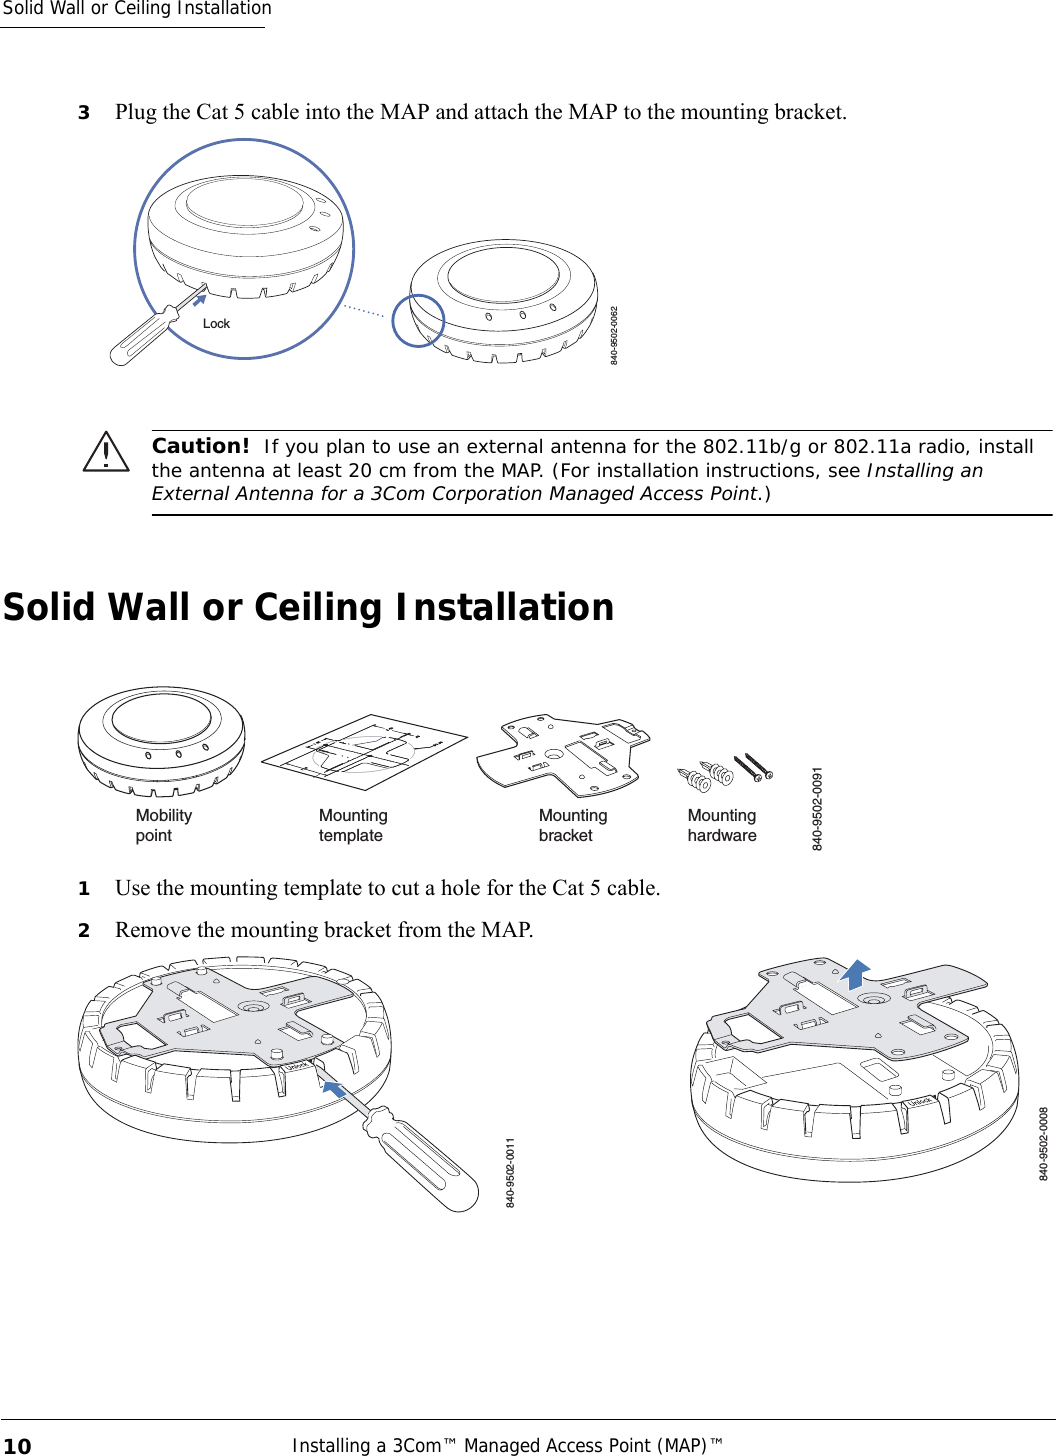 Solid Wall or Ceiling InstallationInstalling a 3Com™ Managed Access Point (MAP)™ 103Plug the Cat 5 cable into the MAP and attach the MAP to the mounting bracket.Solid Wall or Ceiling Installation1Use the mounting template to cut a hole for the Cat 5 cable. 2Remove the mounting bracket from the MAP.Caution!  If you plan to use an external antenna for the 802.11b/g or 802.11a radio, install the antenna at least 20 cm from the MAP. (For installation instructions, see Installing an External Antenna for a 3Com Corporation Managed Access Point.)840-9502-0062LockMountinghardwareMountingtemplateMountingbracketMobilitypoint840-9502-0091840-9502-0011840-9502-0008